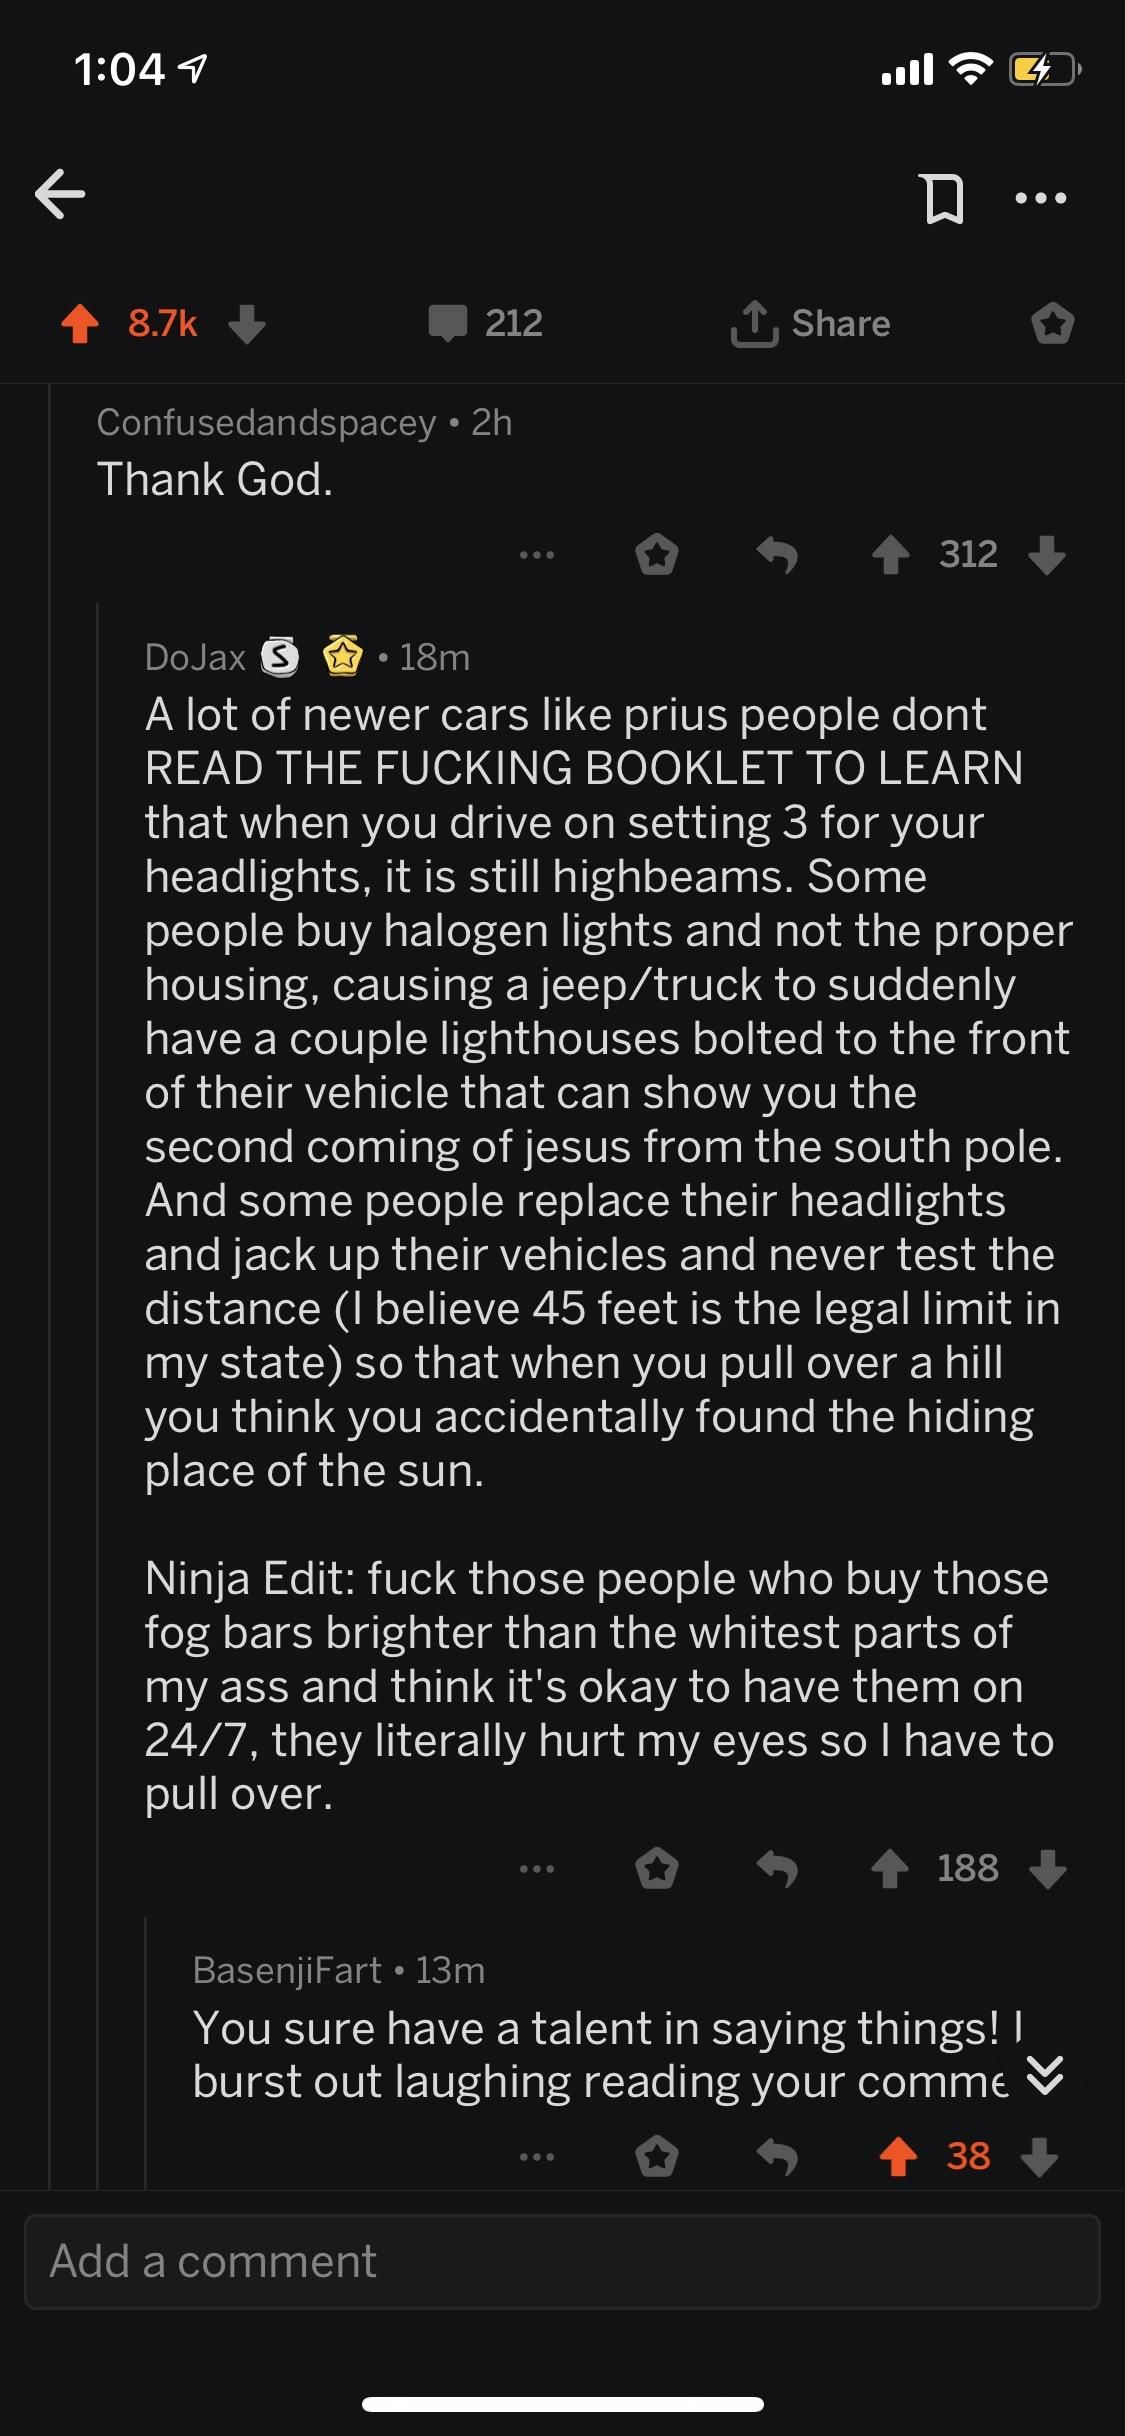 This comment about high beams made me lose my shit